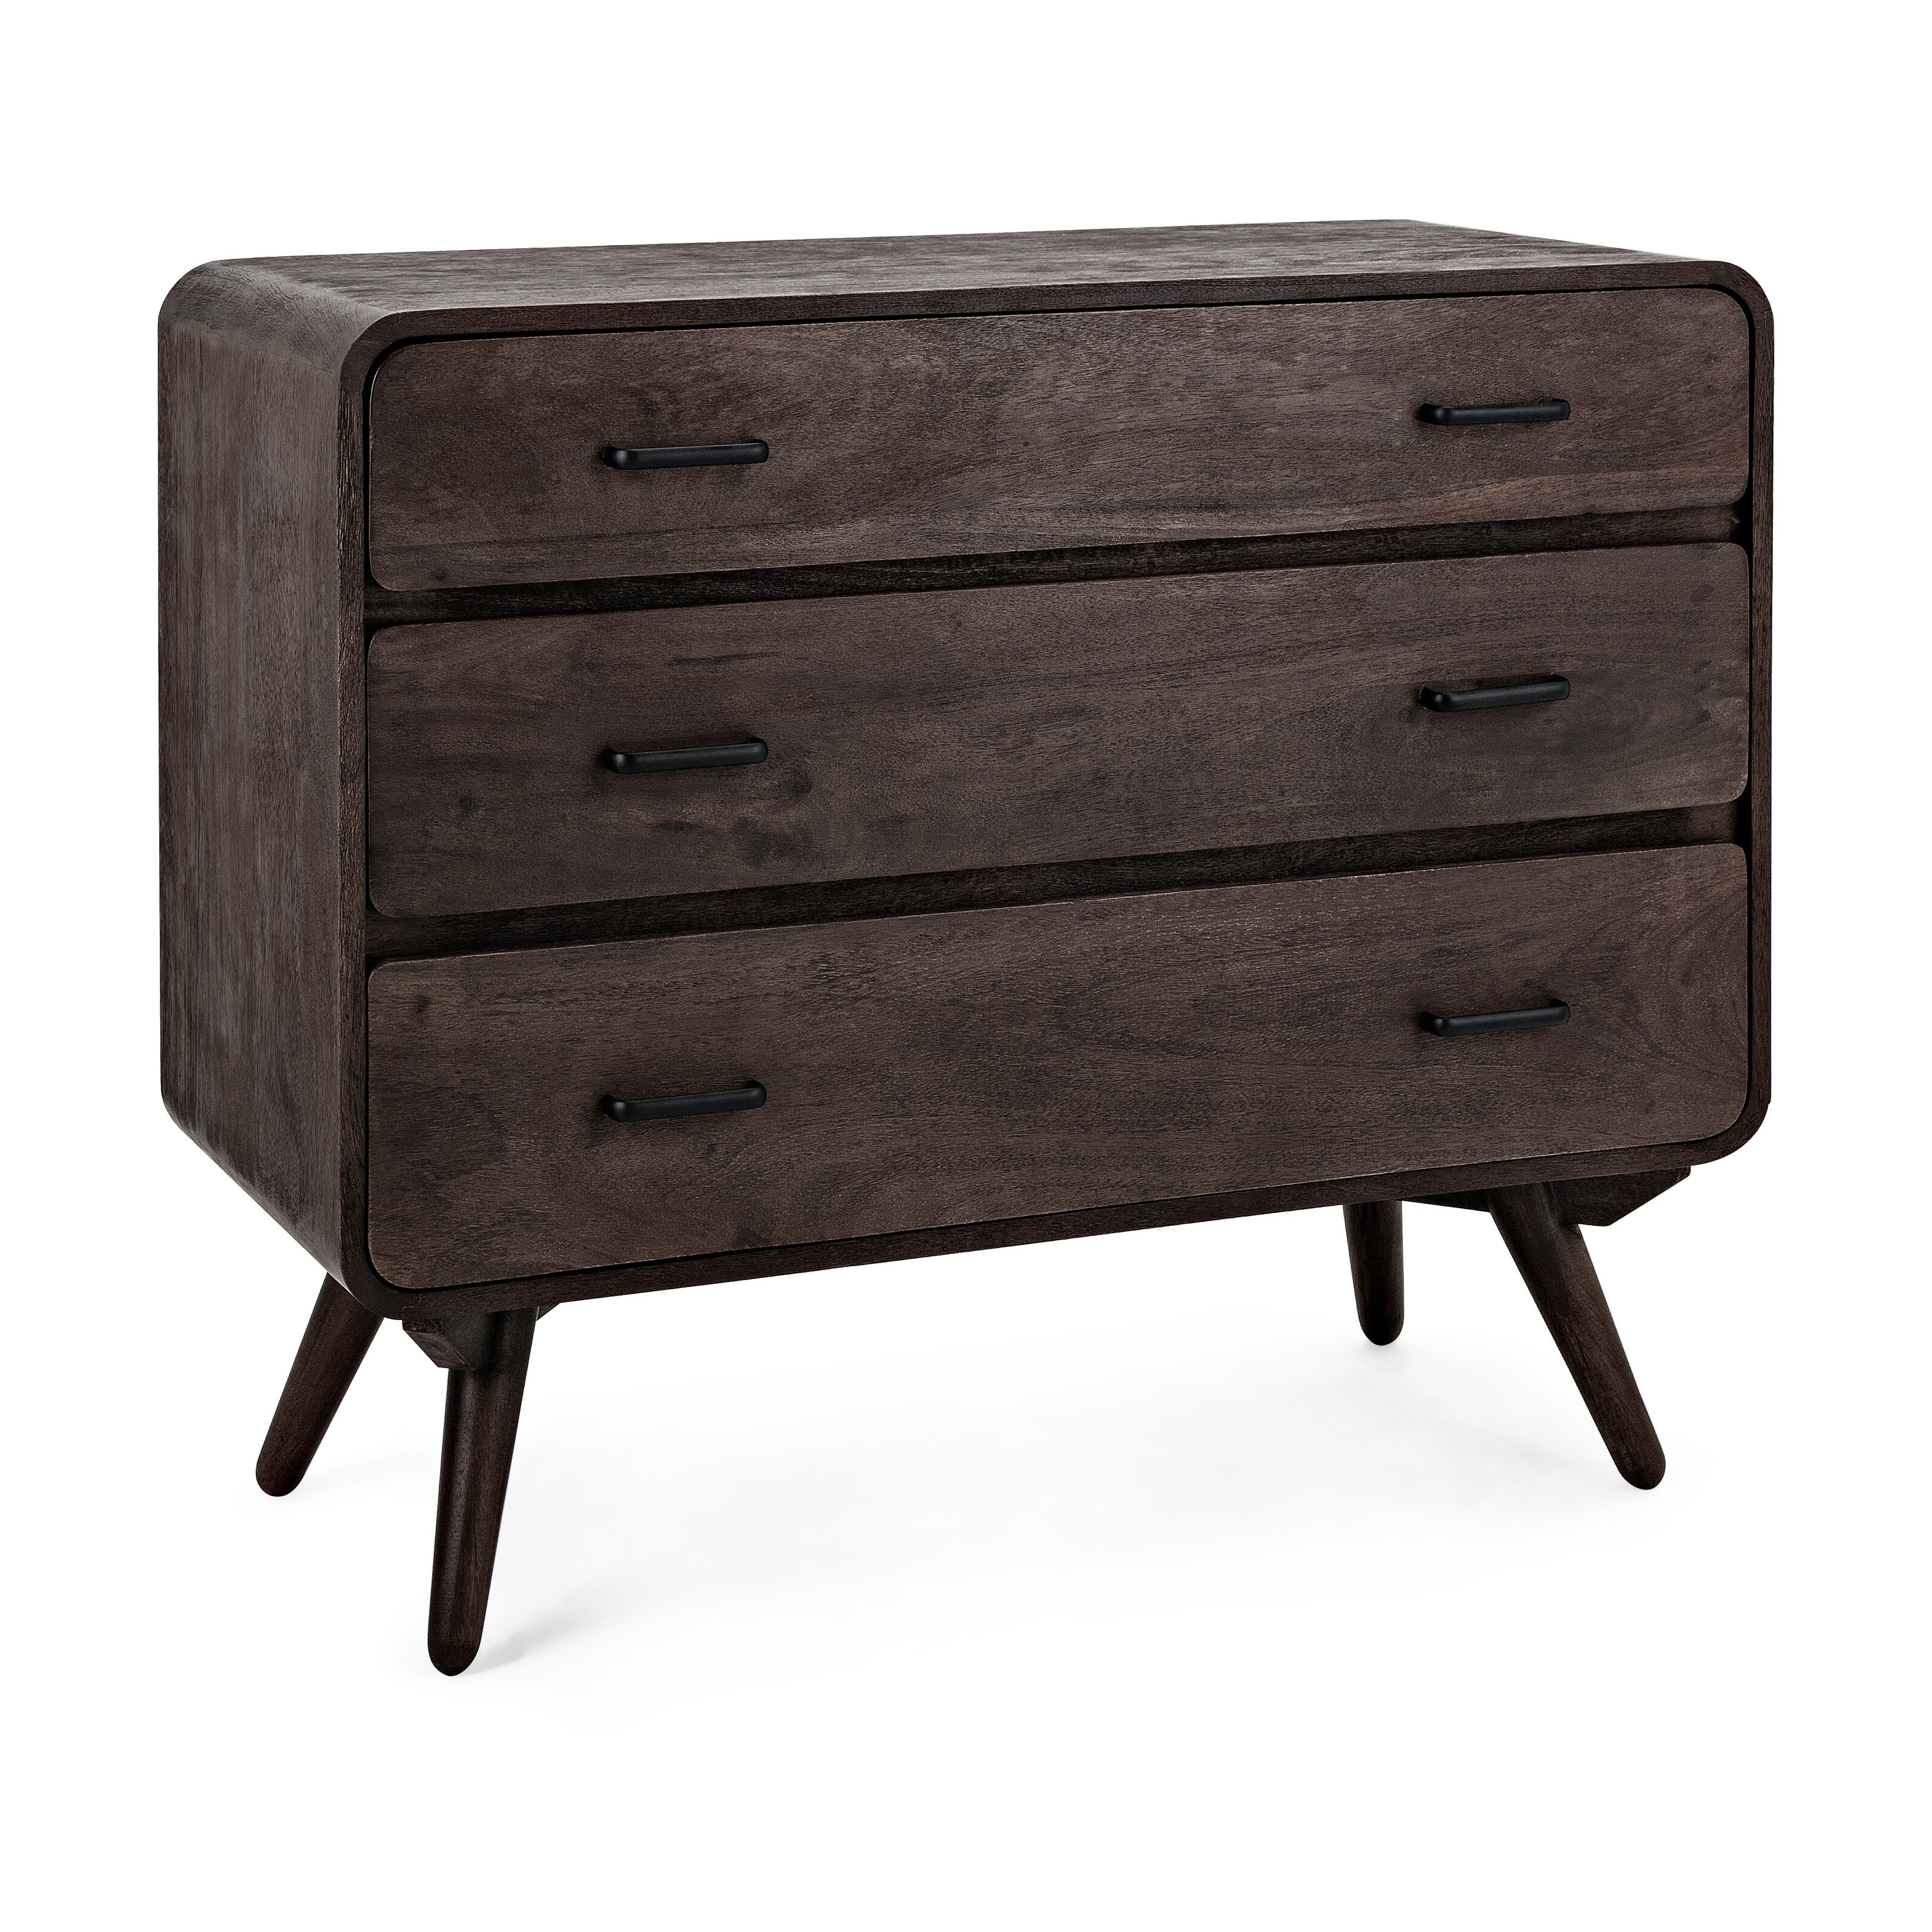 Shop Havana Stained Brown 3 Drawer Chest Overstock 23510539